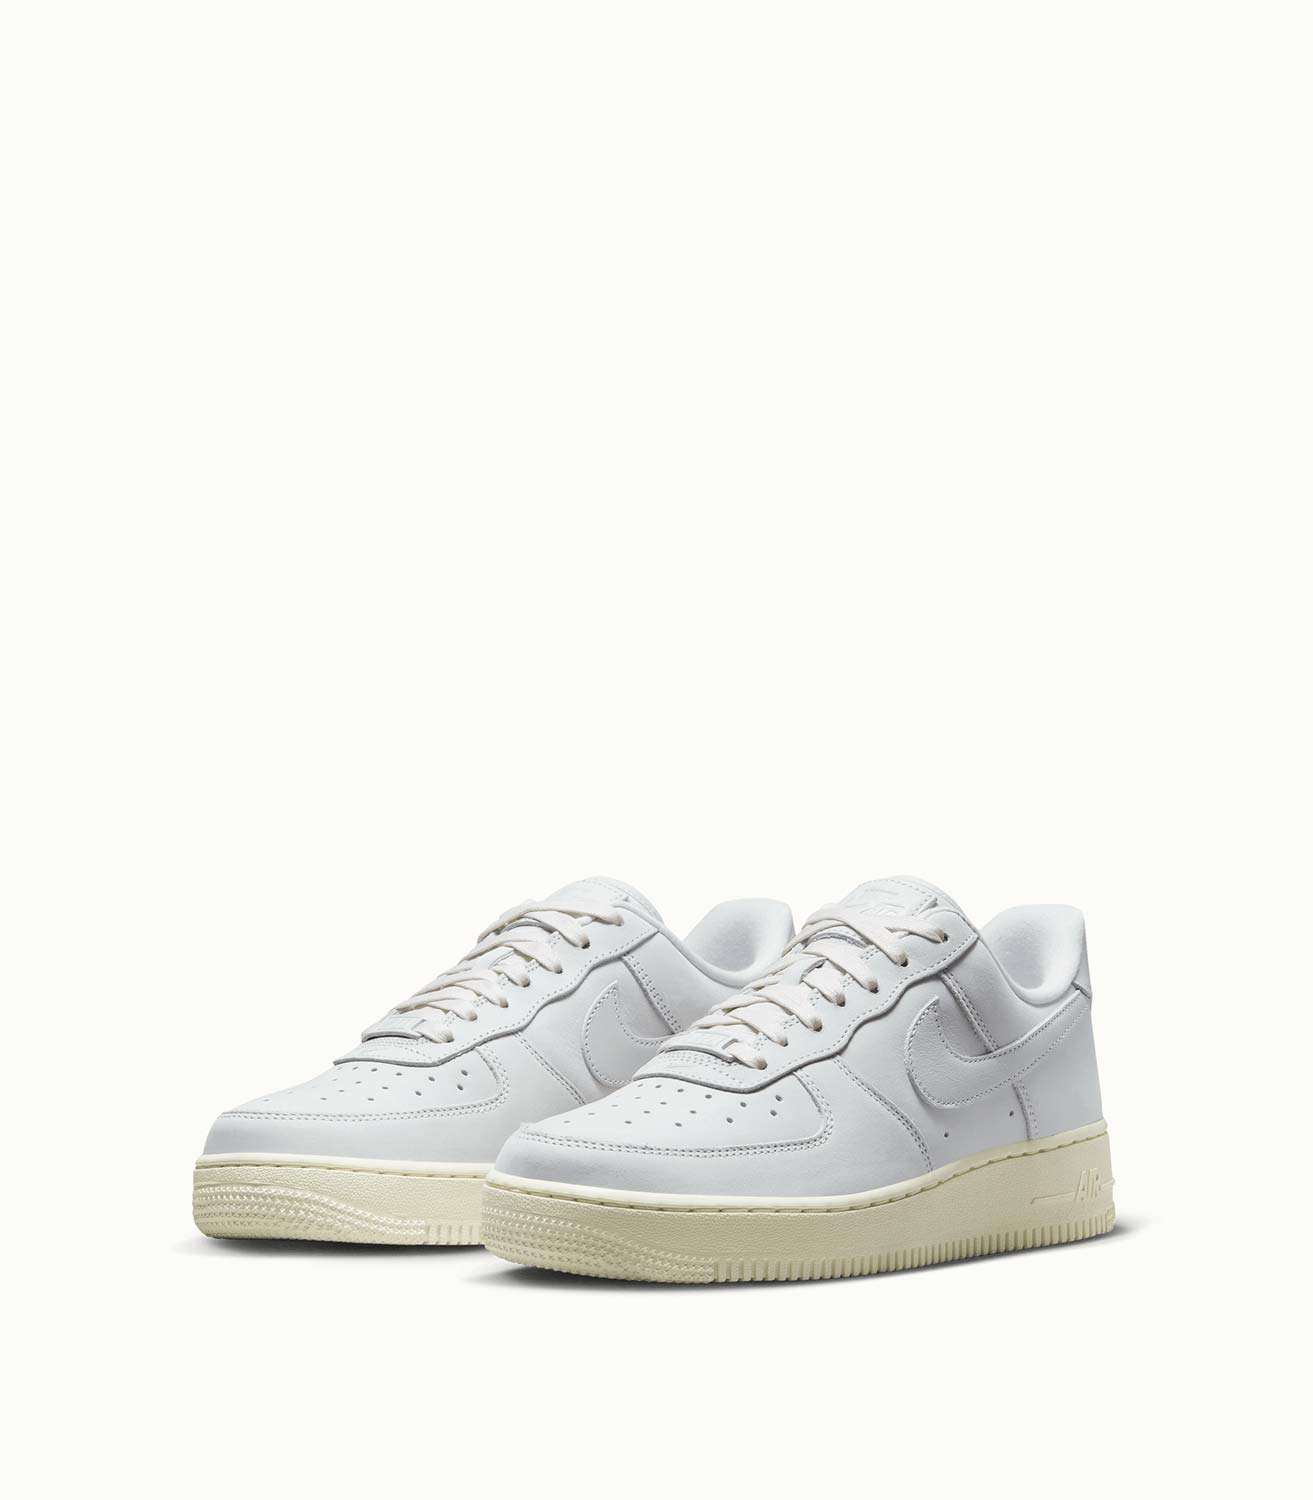 NIKE AIR FORCE 1 I NUBUCK LEATHER SNEAKERS COLOR WHITE | Playground